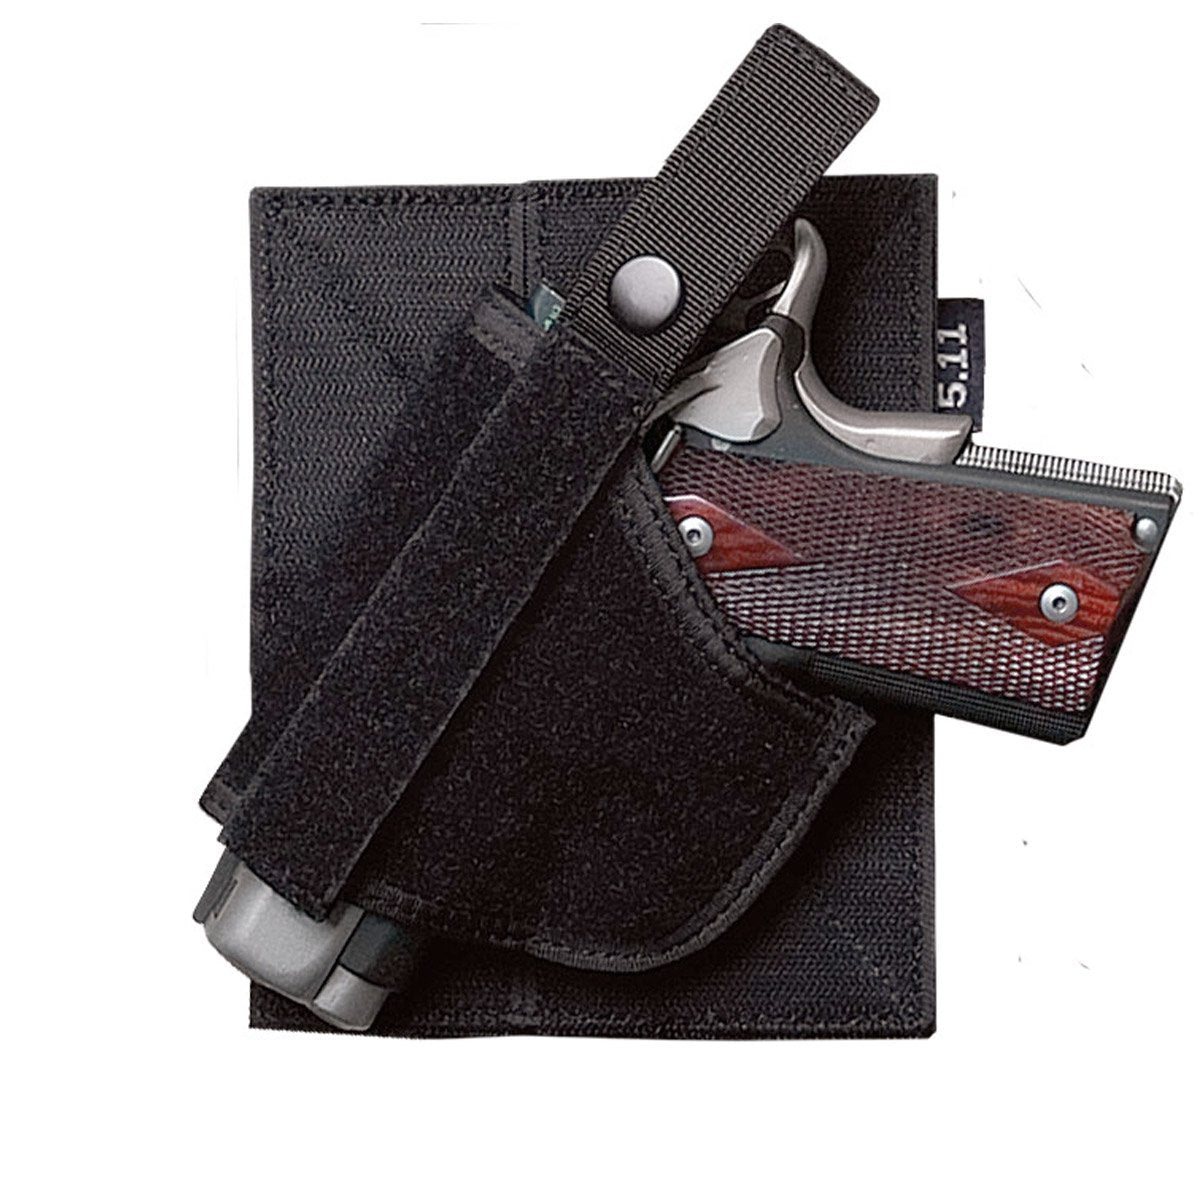 5.11 Tactical LBE Compact Holster | Tactical Gear Australia Tactical Gear